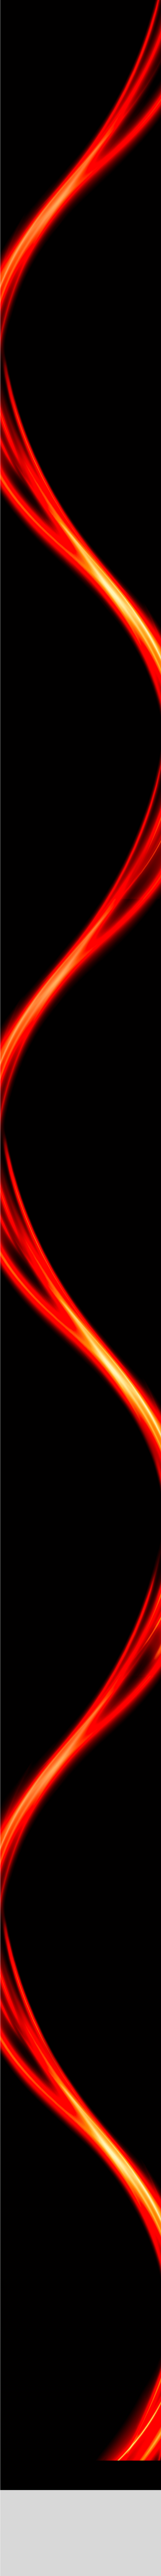 Black background with a red and yellow spiral light flare